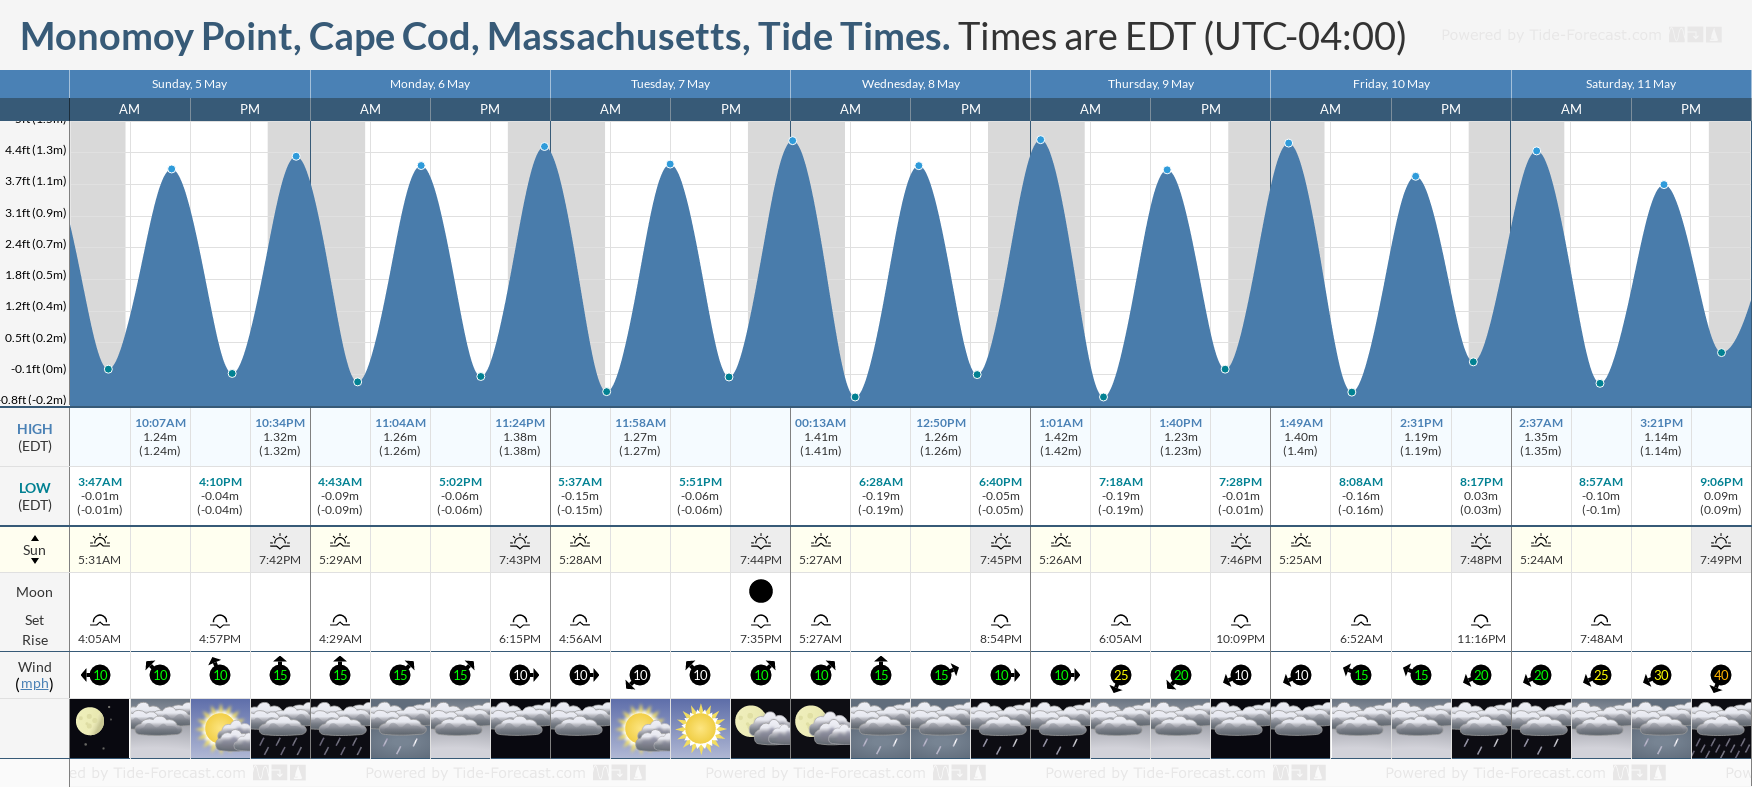 Monomoy Point, Cape Cod, Massachusetts Tide Chart including high and low tide times for the next 7 days